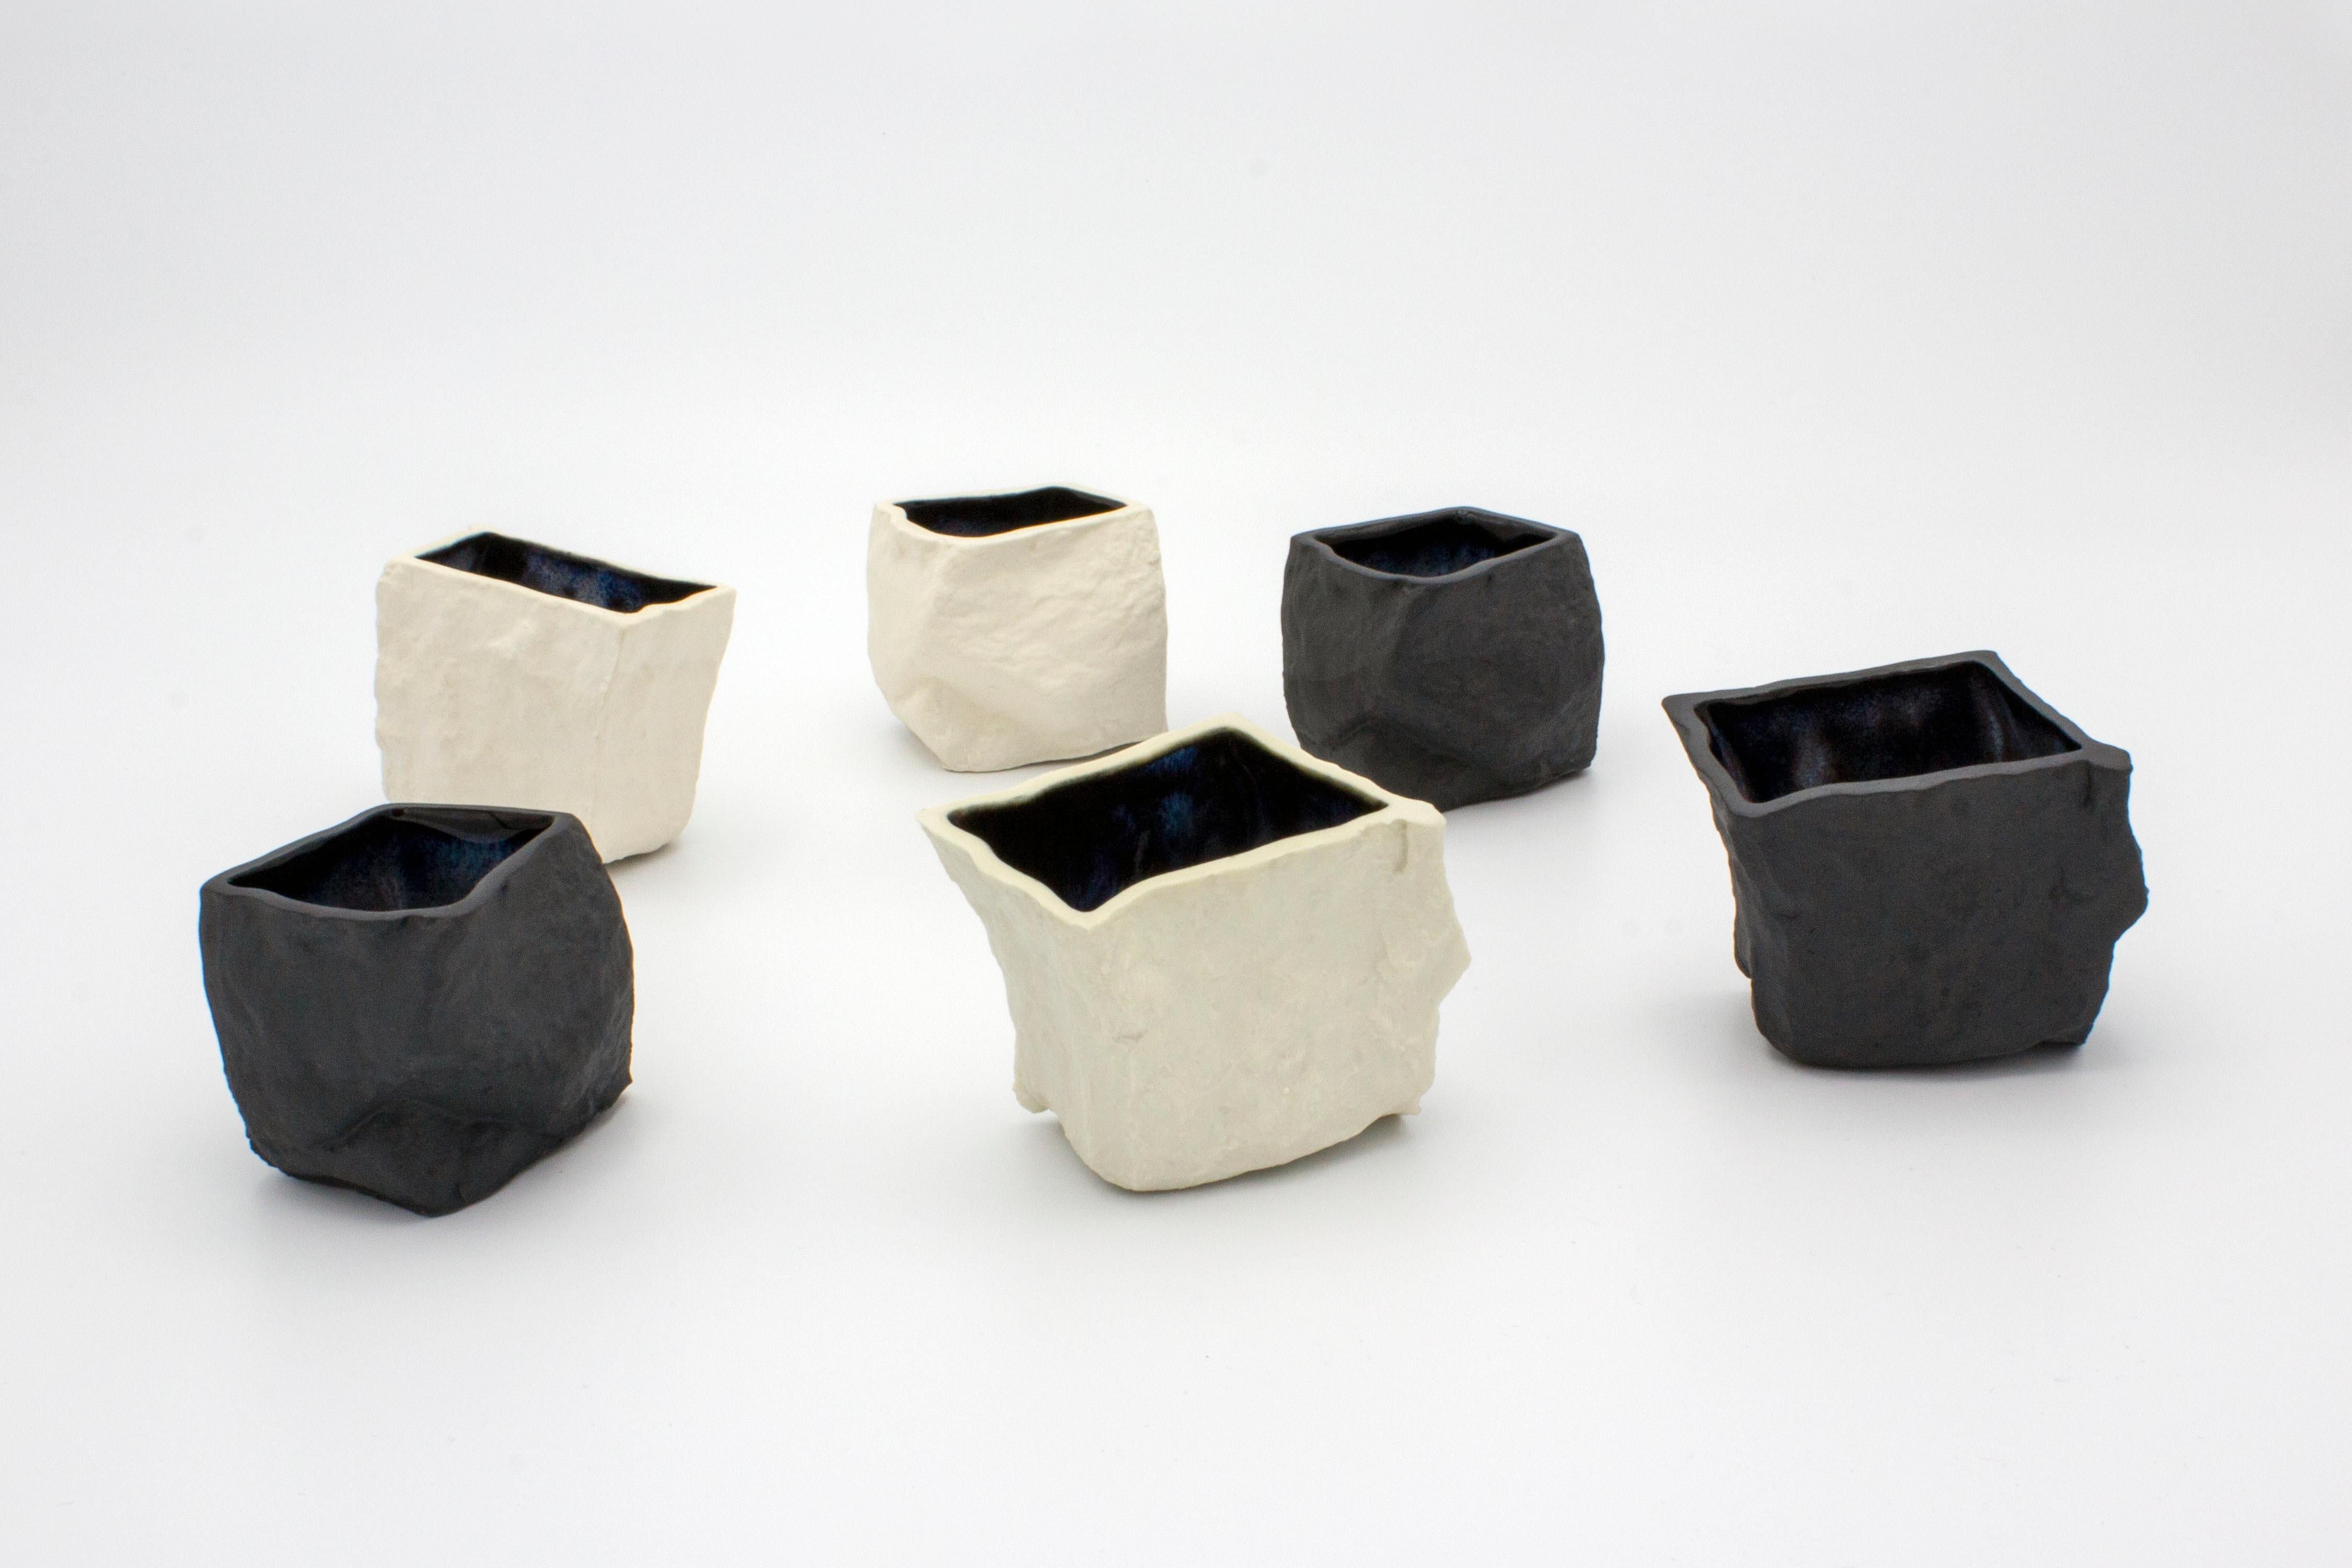 Black and white cups 6-set by Craig Barrow
Dimensions: 6 x 5 x 5.5cm
Volume approximate: 50ml

Variations:
Black porcelain, black glaze.
Black porcelain, nebular glaze.
White porcelain, white glaze.
White porcelain, nebular glaze.

A set